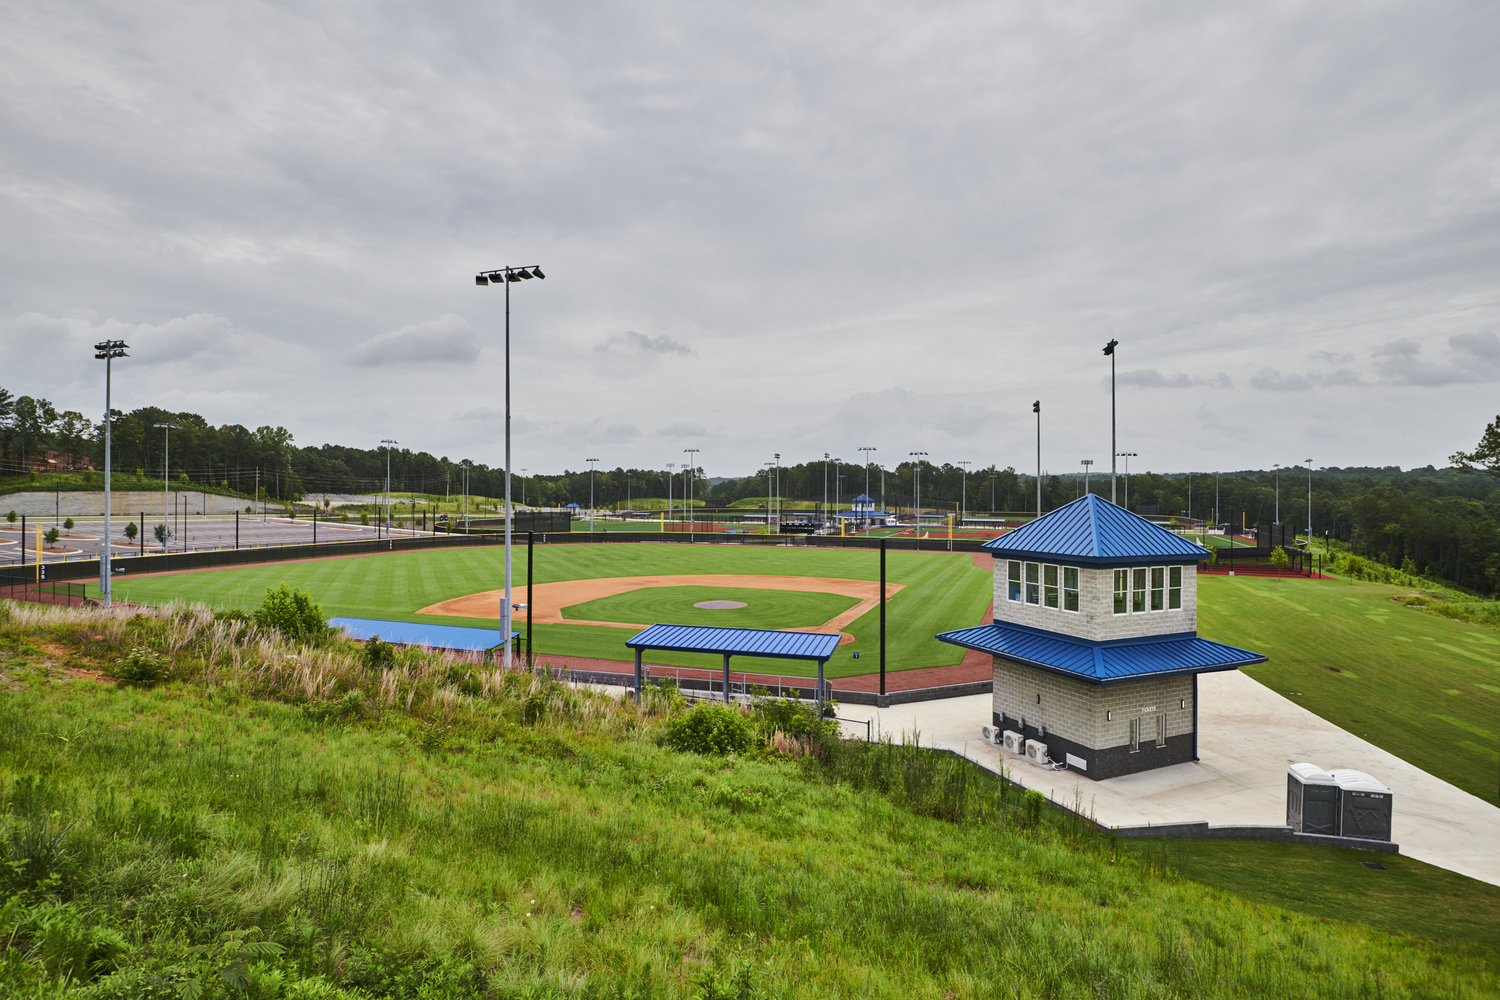 Phase II of the Hoover Metropolitan Complex outdoor facility includes five NCAA regulation-size soccer/football/lacrosse fields (can be converted to ten youth fields), five NCAA regulation-size baseball/softball fields (four with artificial turf, one with natural grass), 16 tennis courts with pro shop, a playground, a splash pad, and a large event lawn.